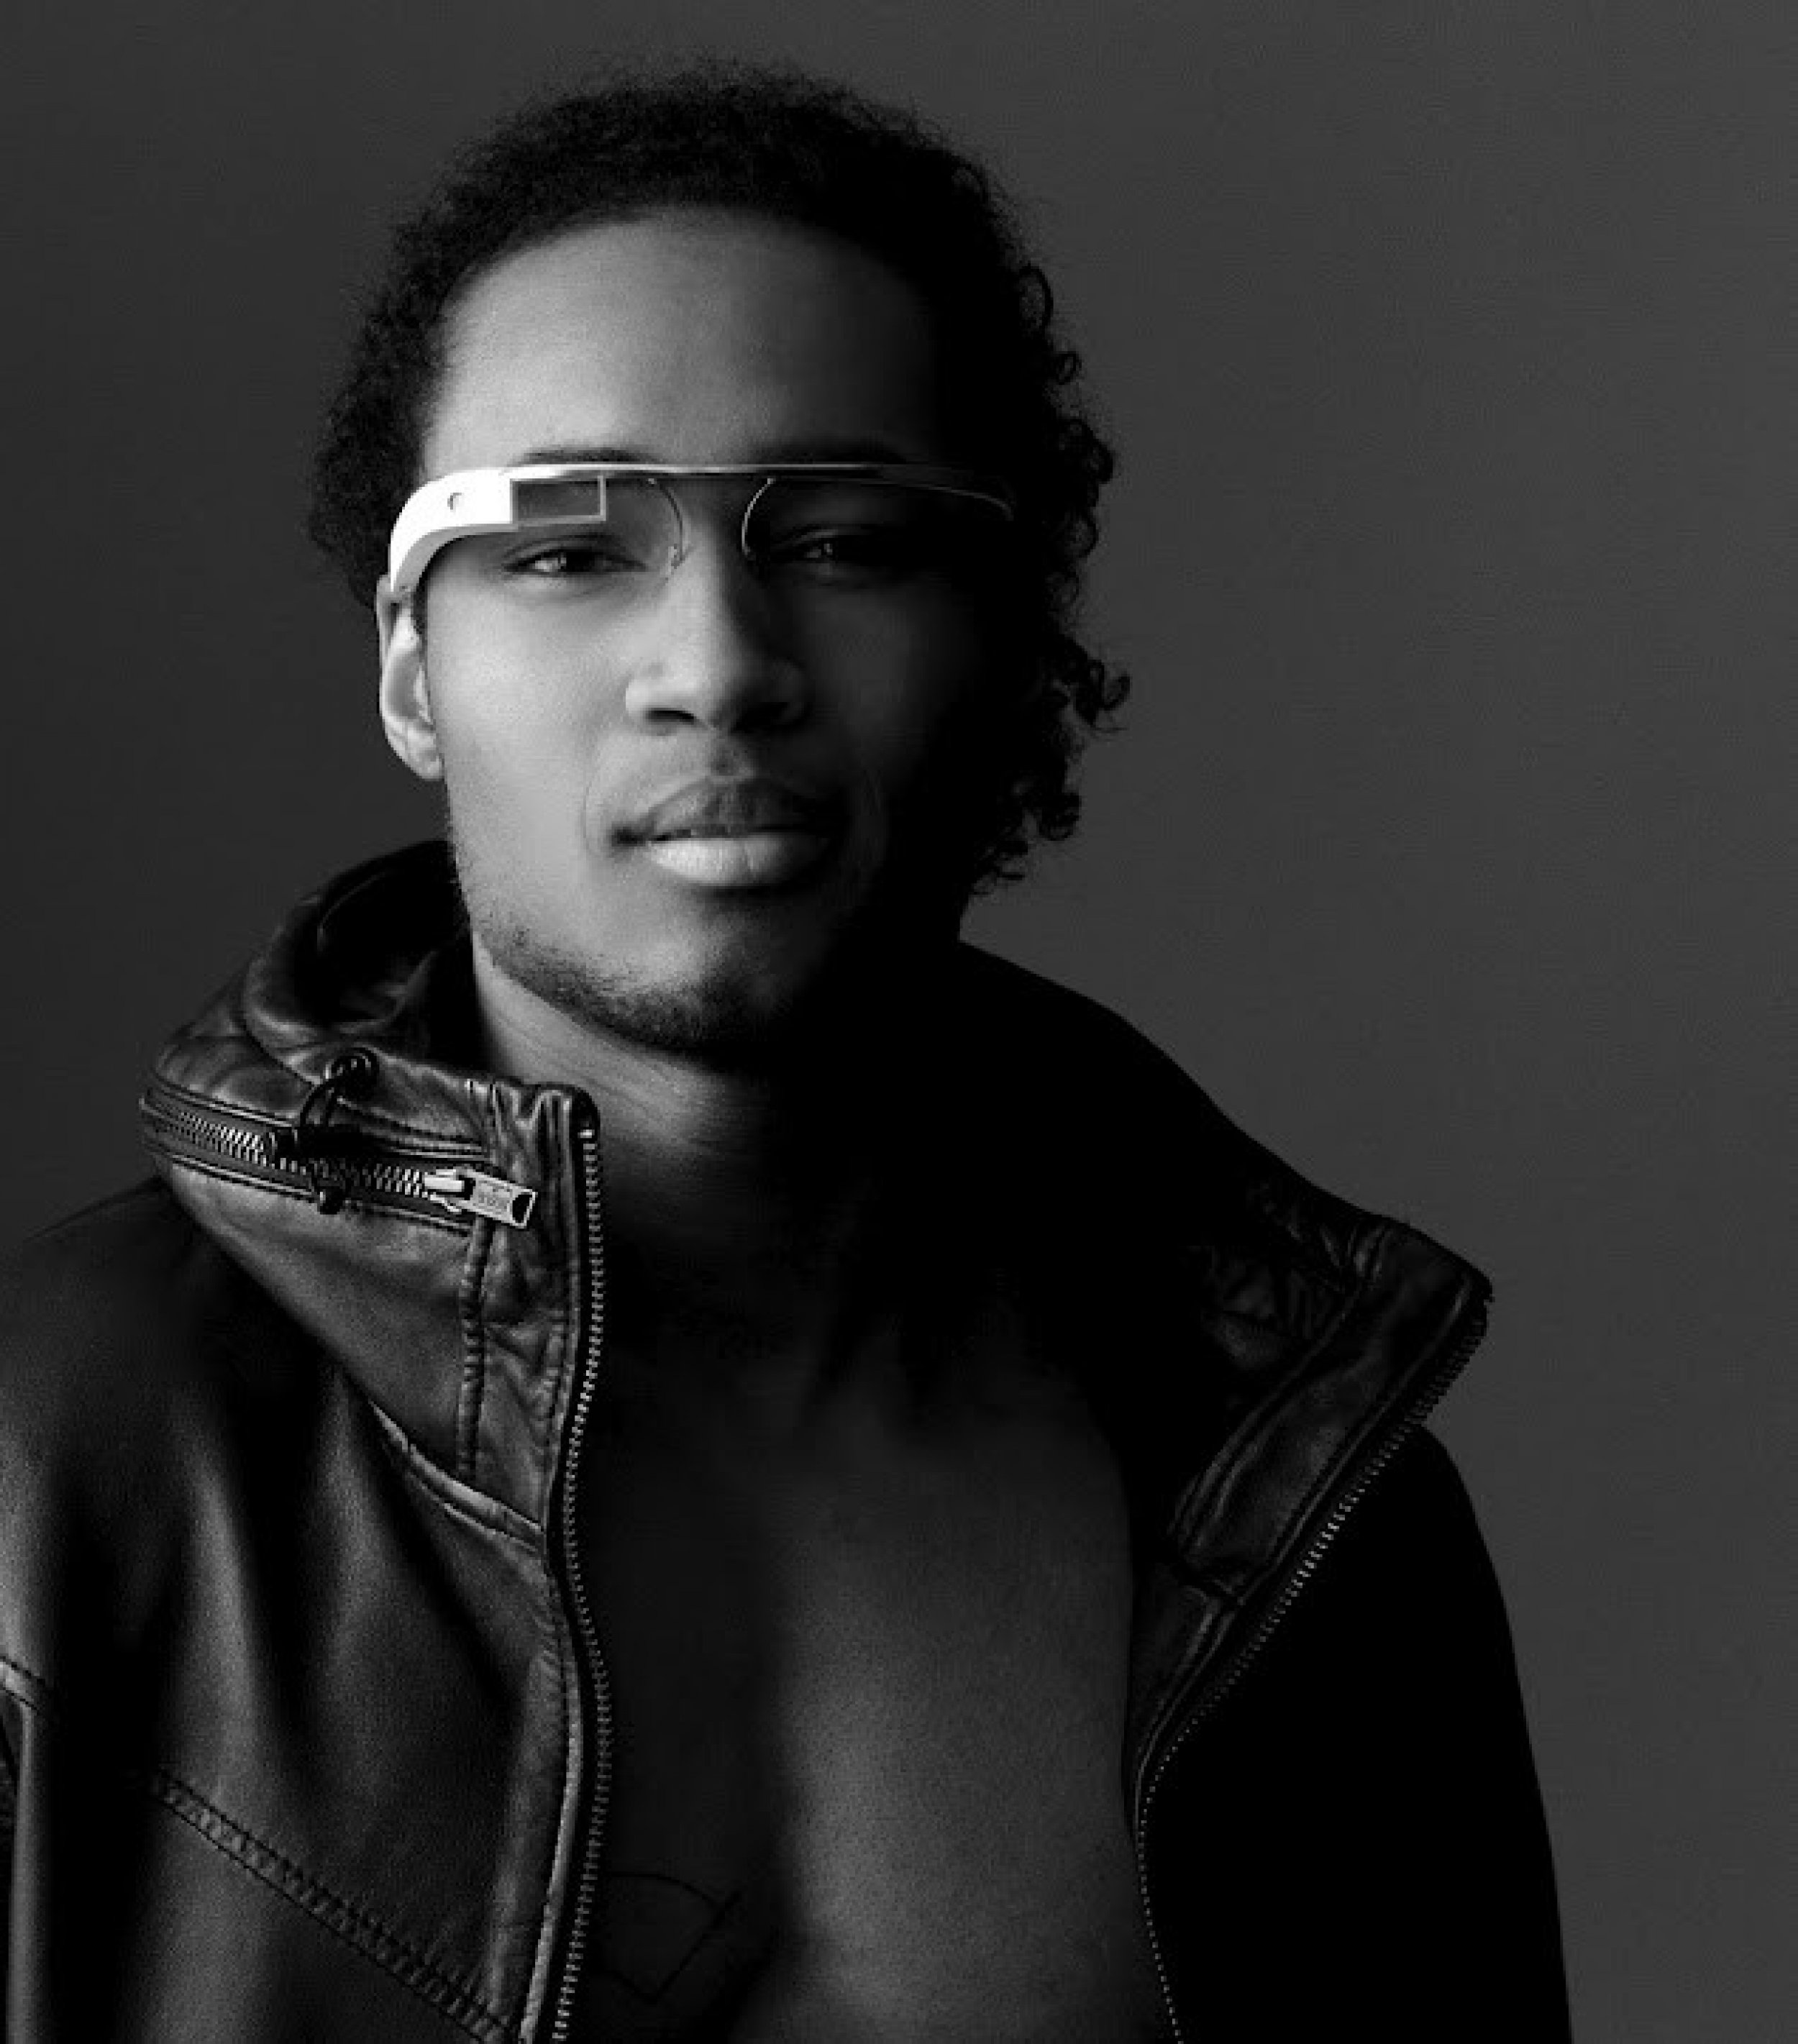 Google Glasses Coming In 2013 Release Date Less Than 12 Months After Developer Version VIDEO